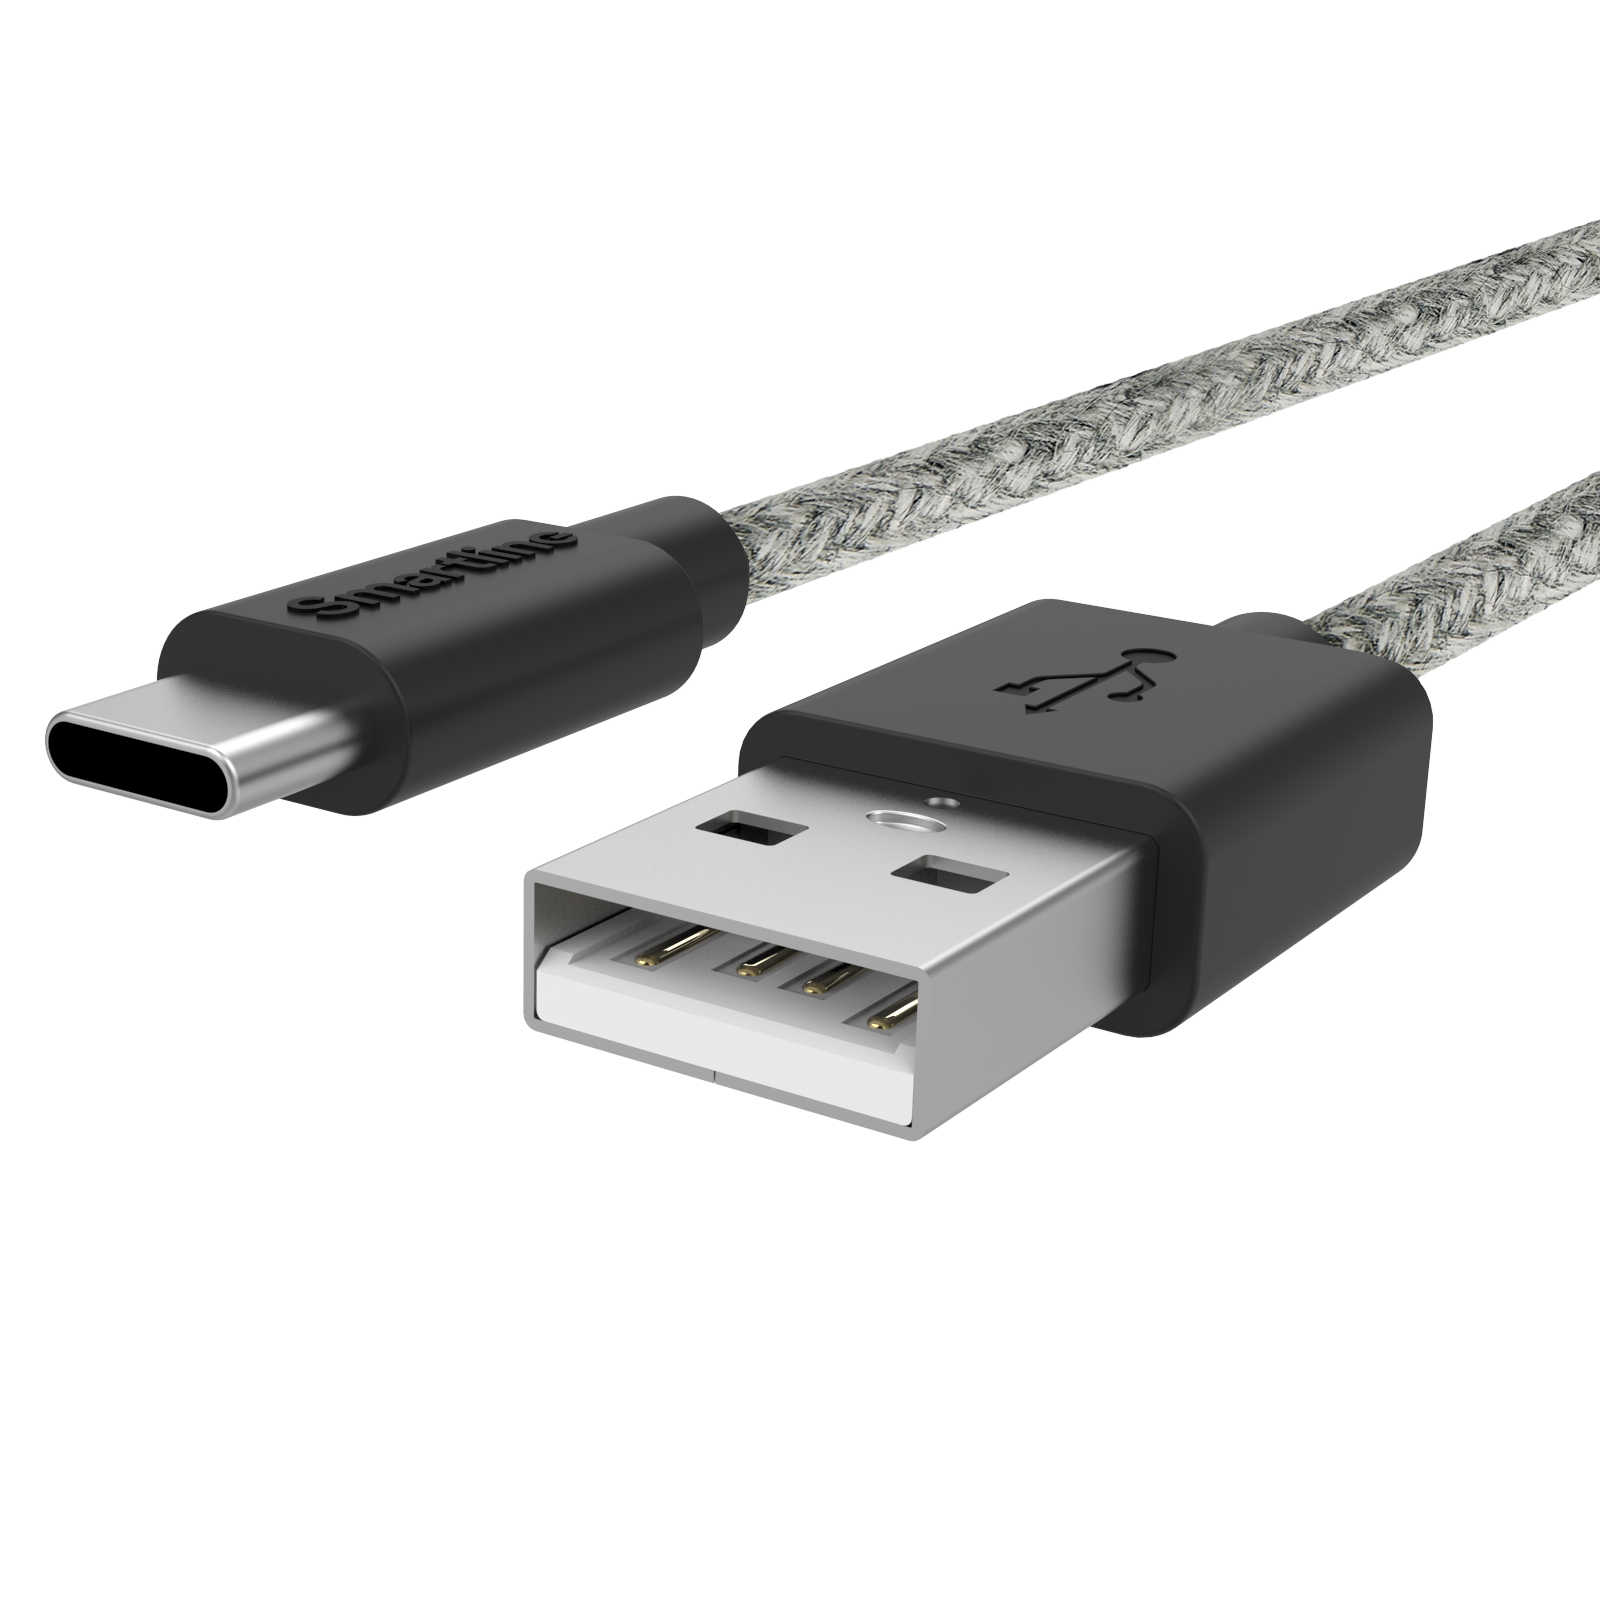 Fuzzy USB-A to USB-C Cable 2 meters Grey